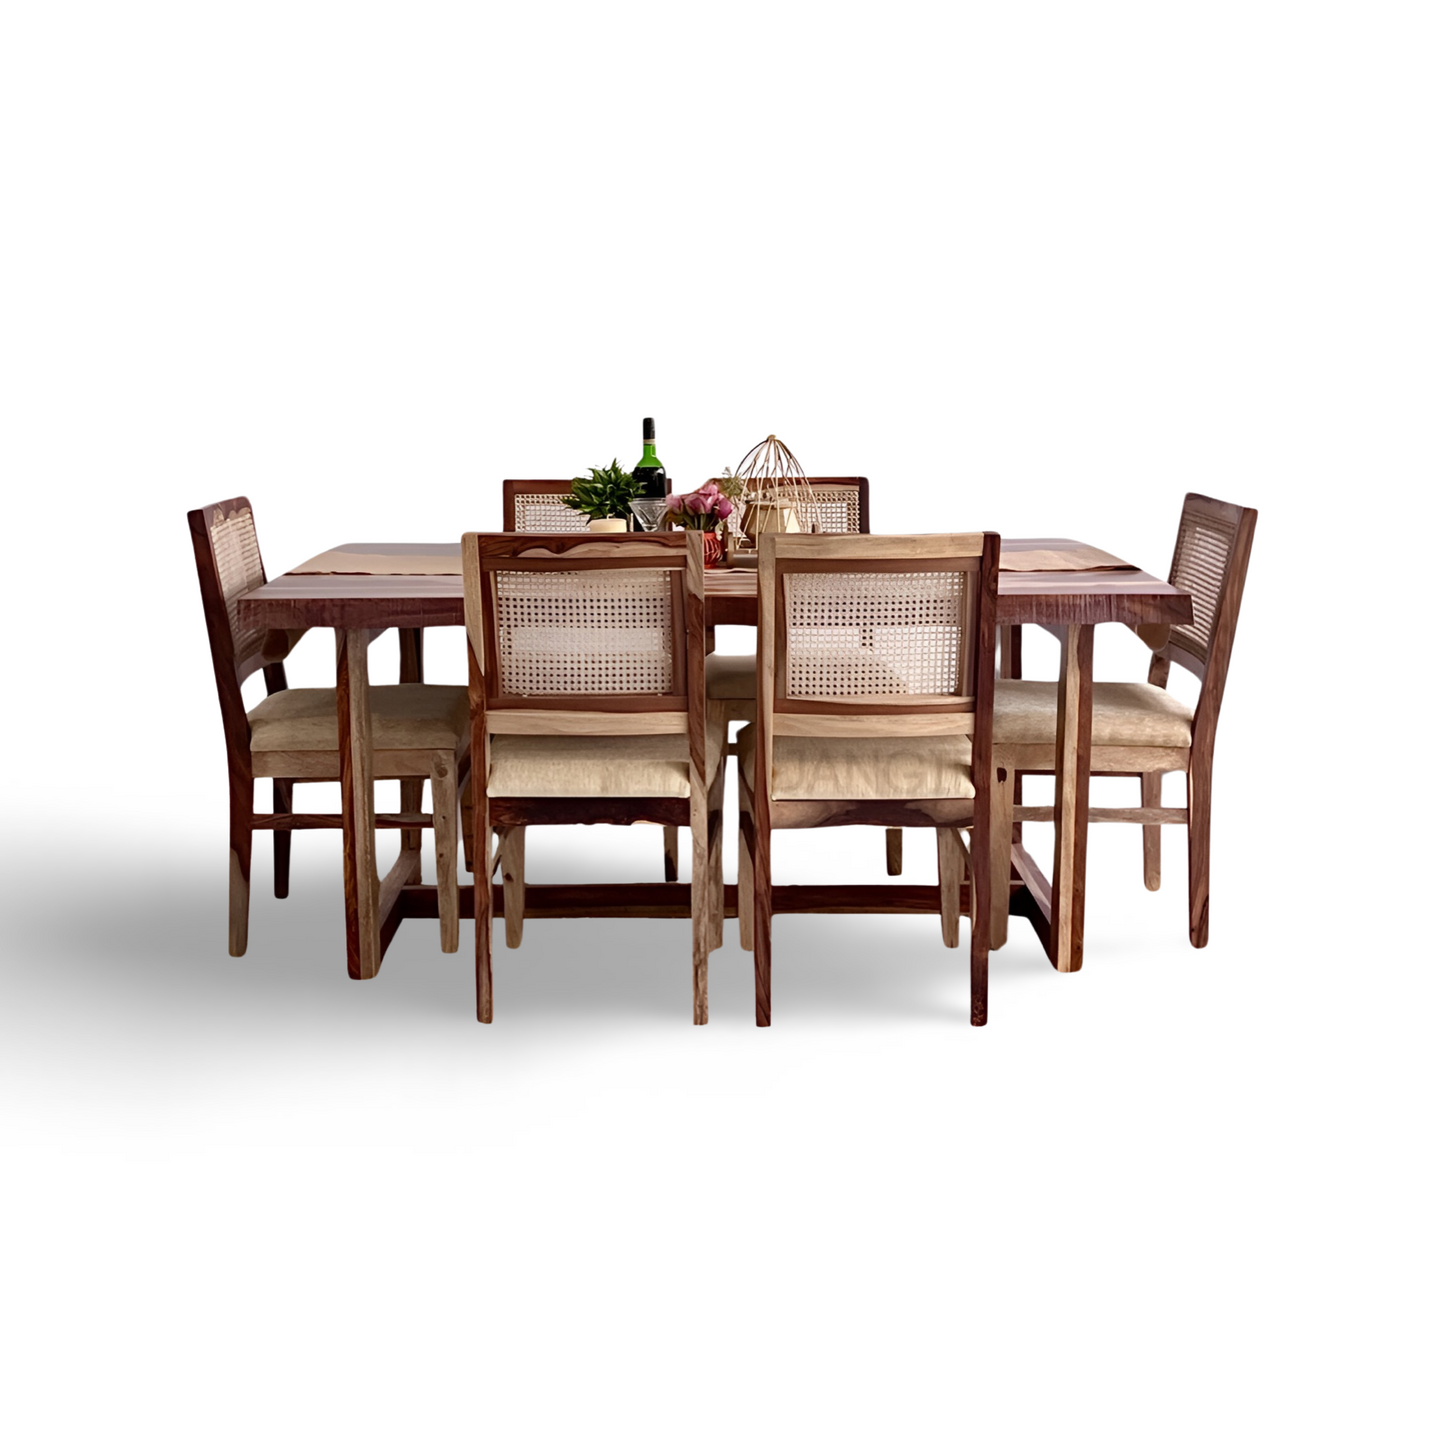 Indulge in a touch of nature's with our live edge dining table with cane weave chairs. Crafted from Sheesham wood, Discover the perfect six-seater dining set to transform your dining room, Shop now!